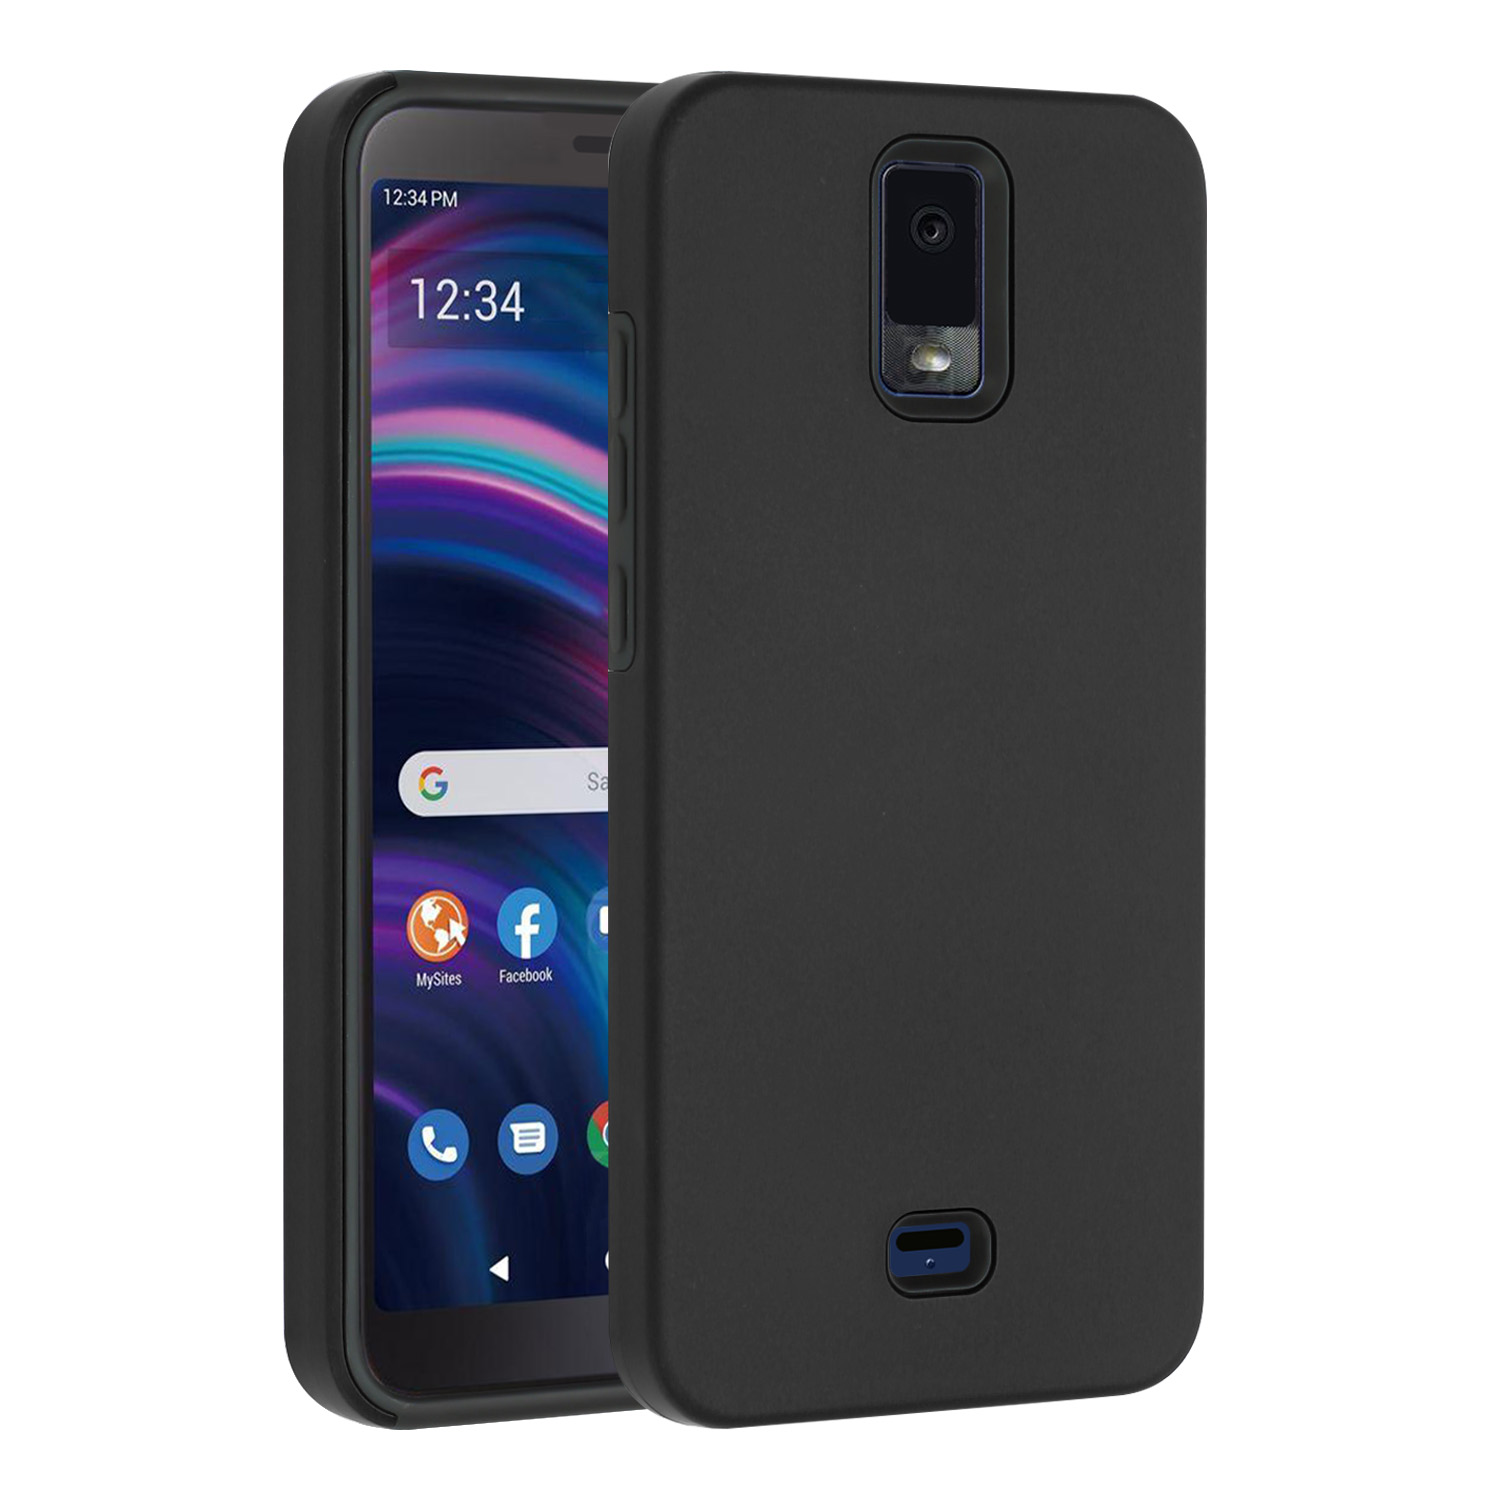 Glossy Dual Layer Armor Defender Hybrid Case Cover for BLU View 3 (Black)